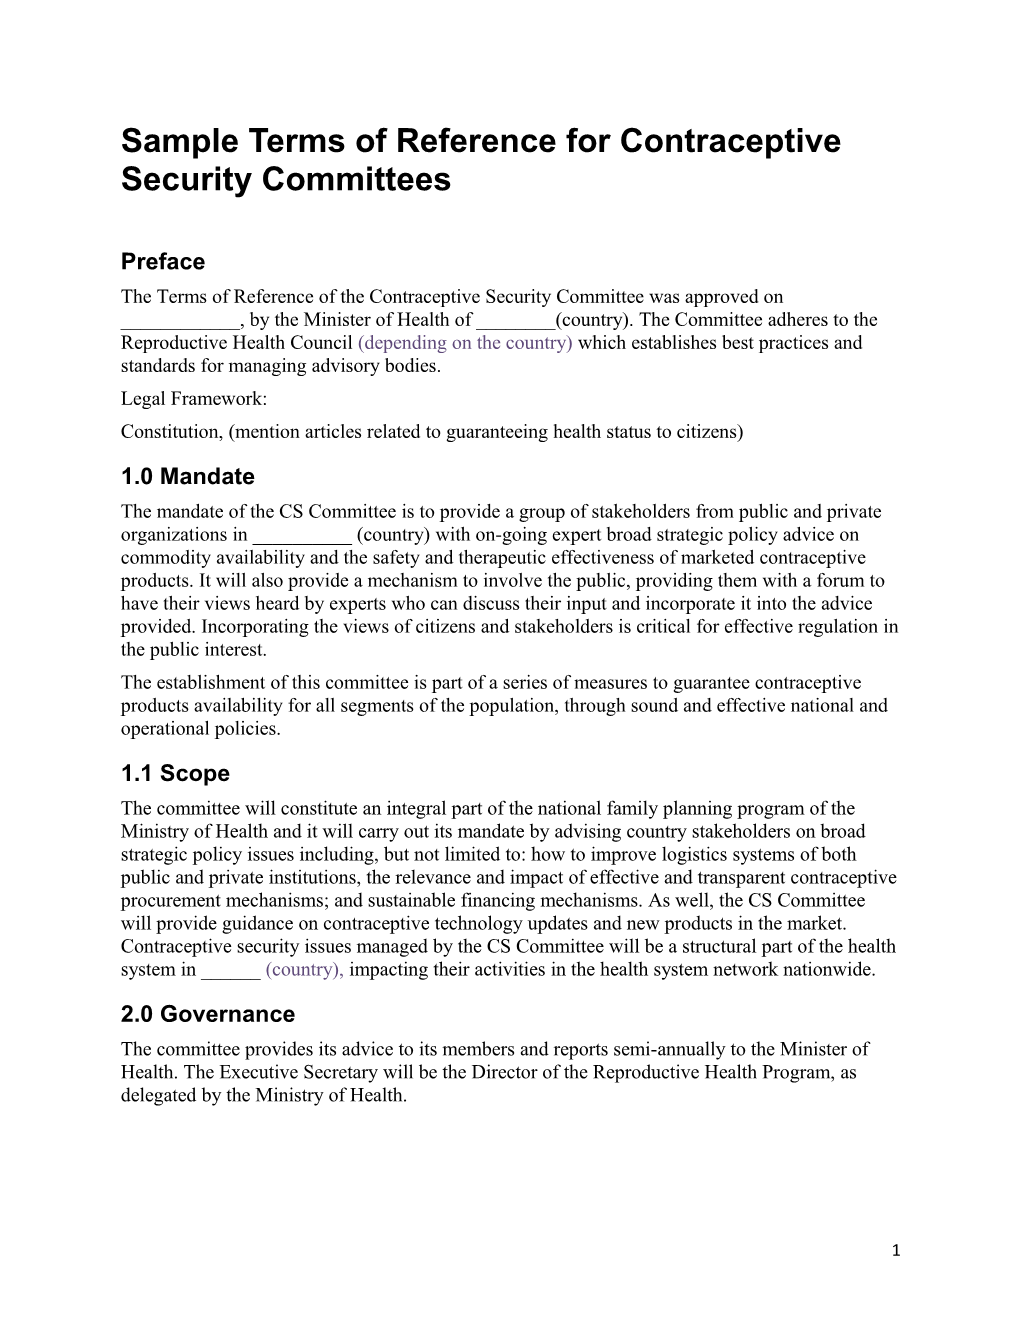 Terms of Reference for Contraceptive Security Committees